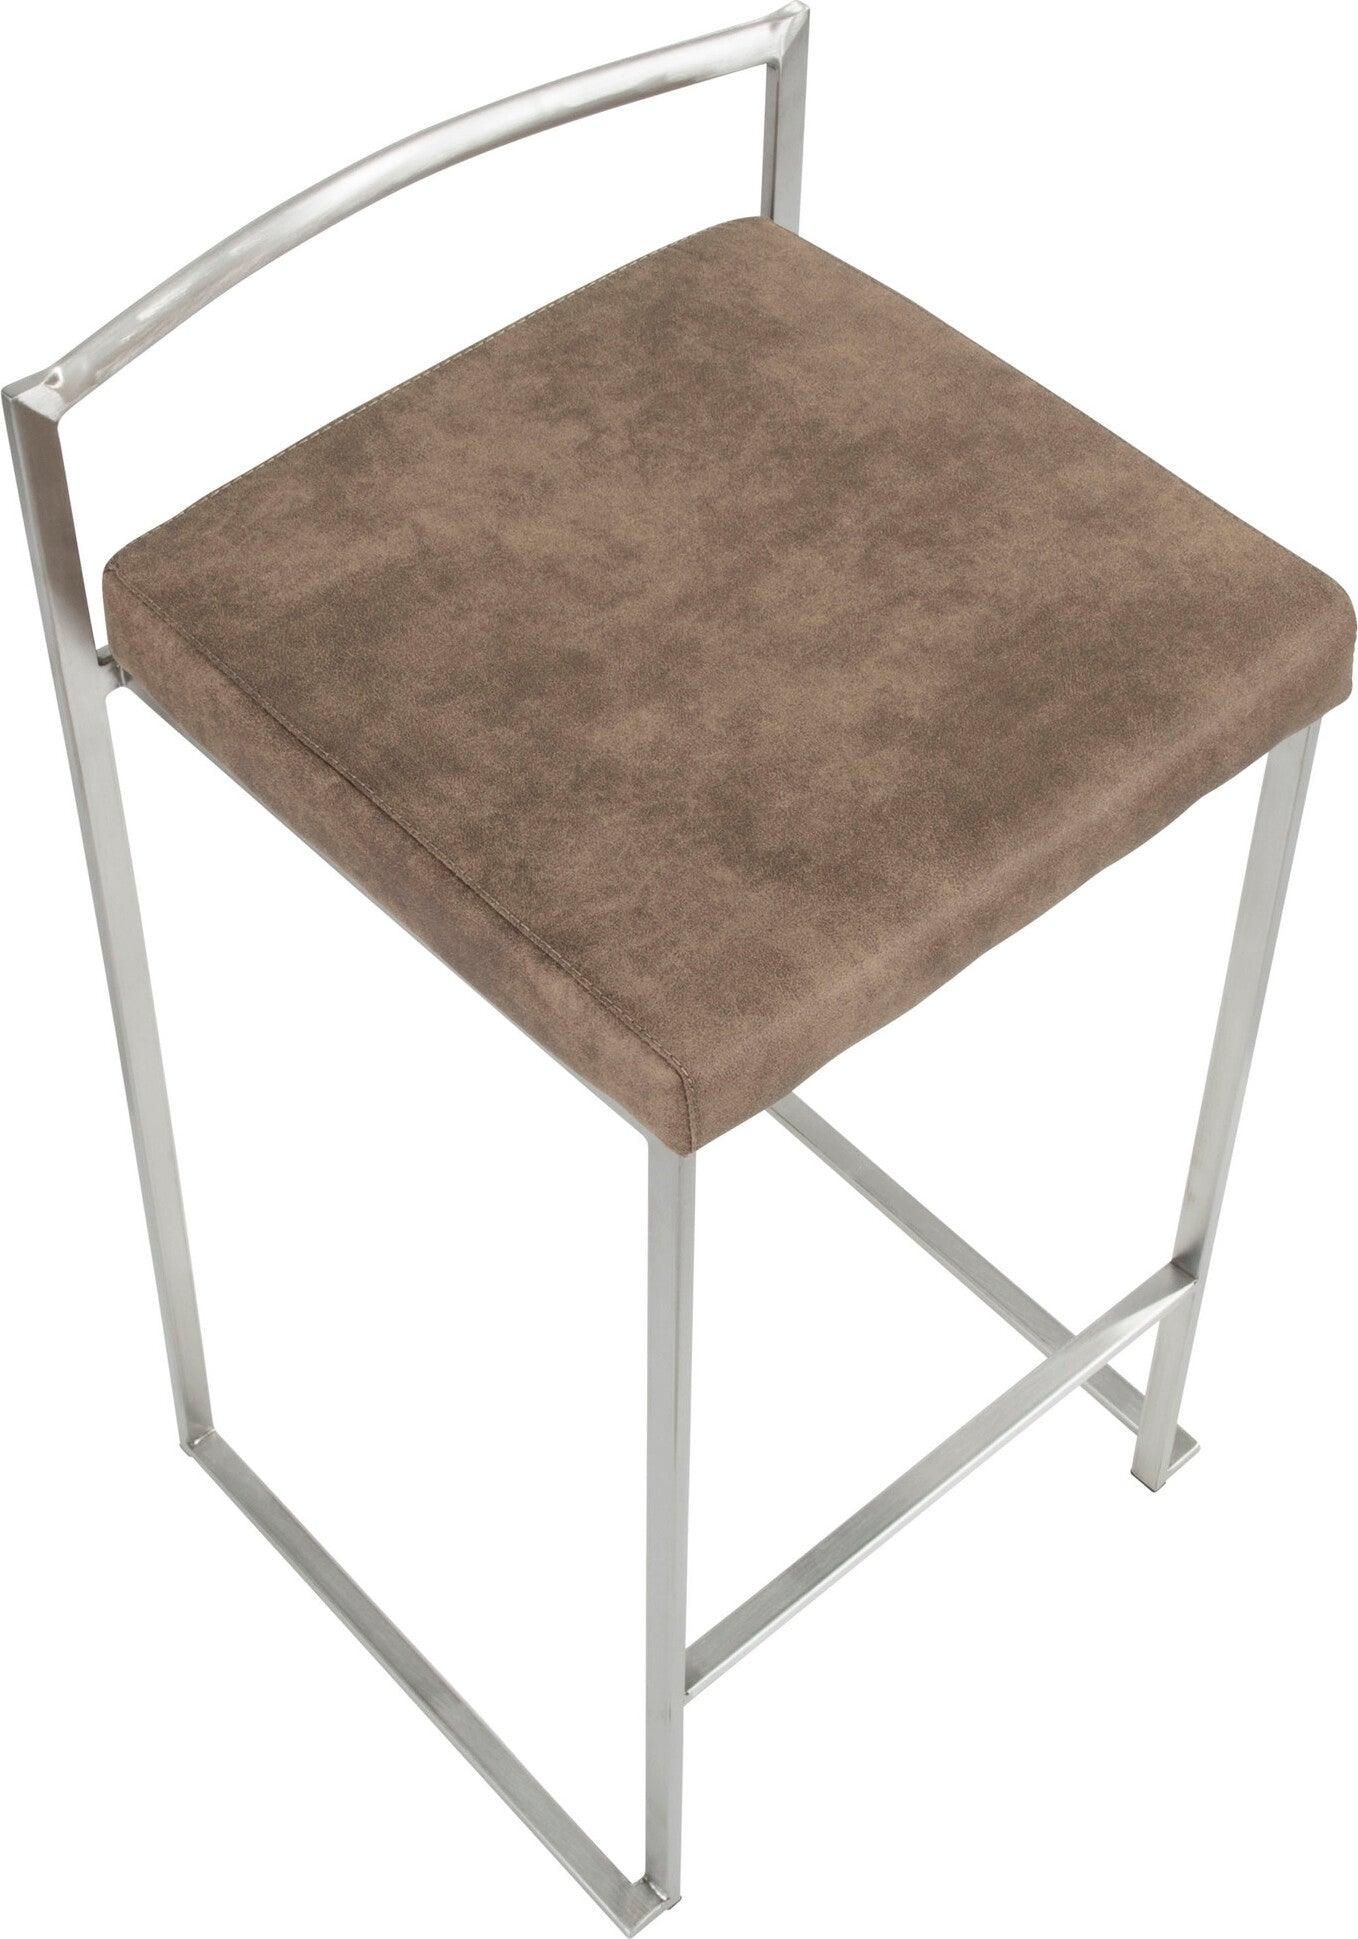 Lumisource Barstools - Fuji Stacker Counter Stool (Set of 2) Stainless Steel & Brown Cowboy